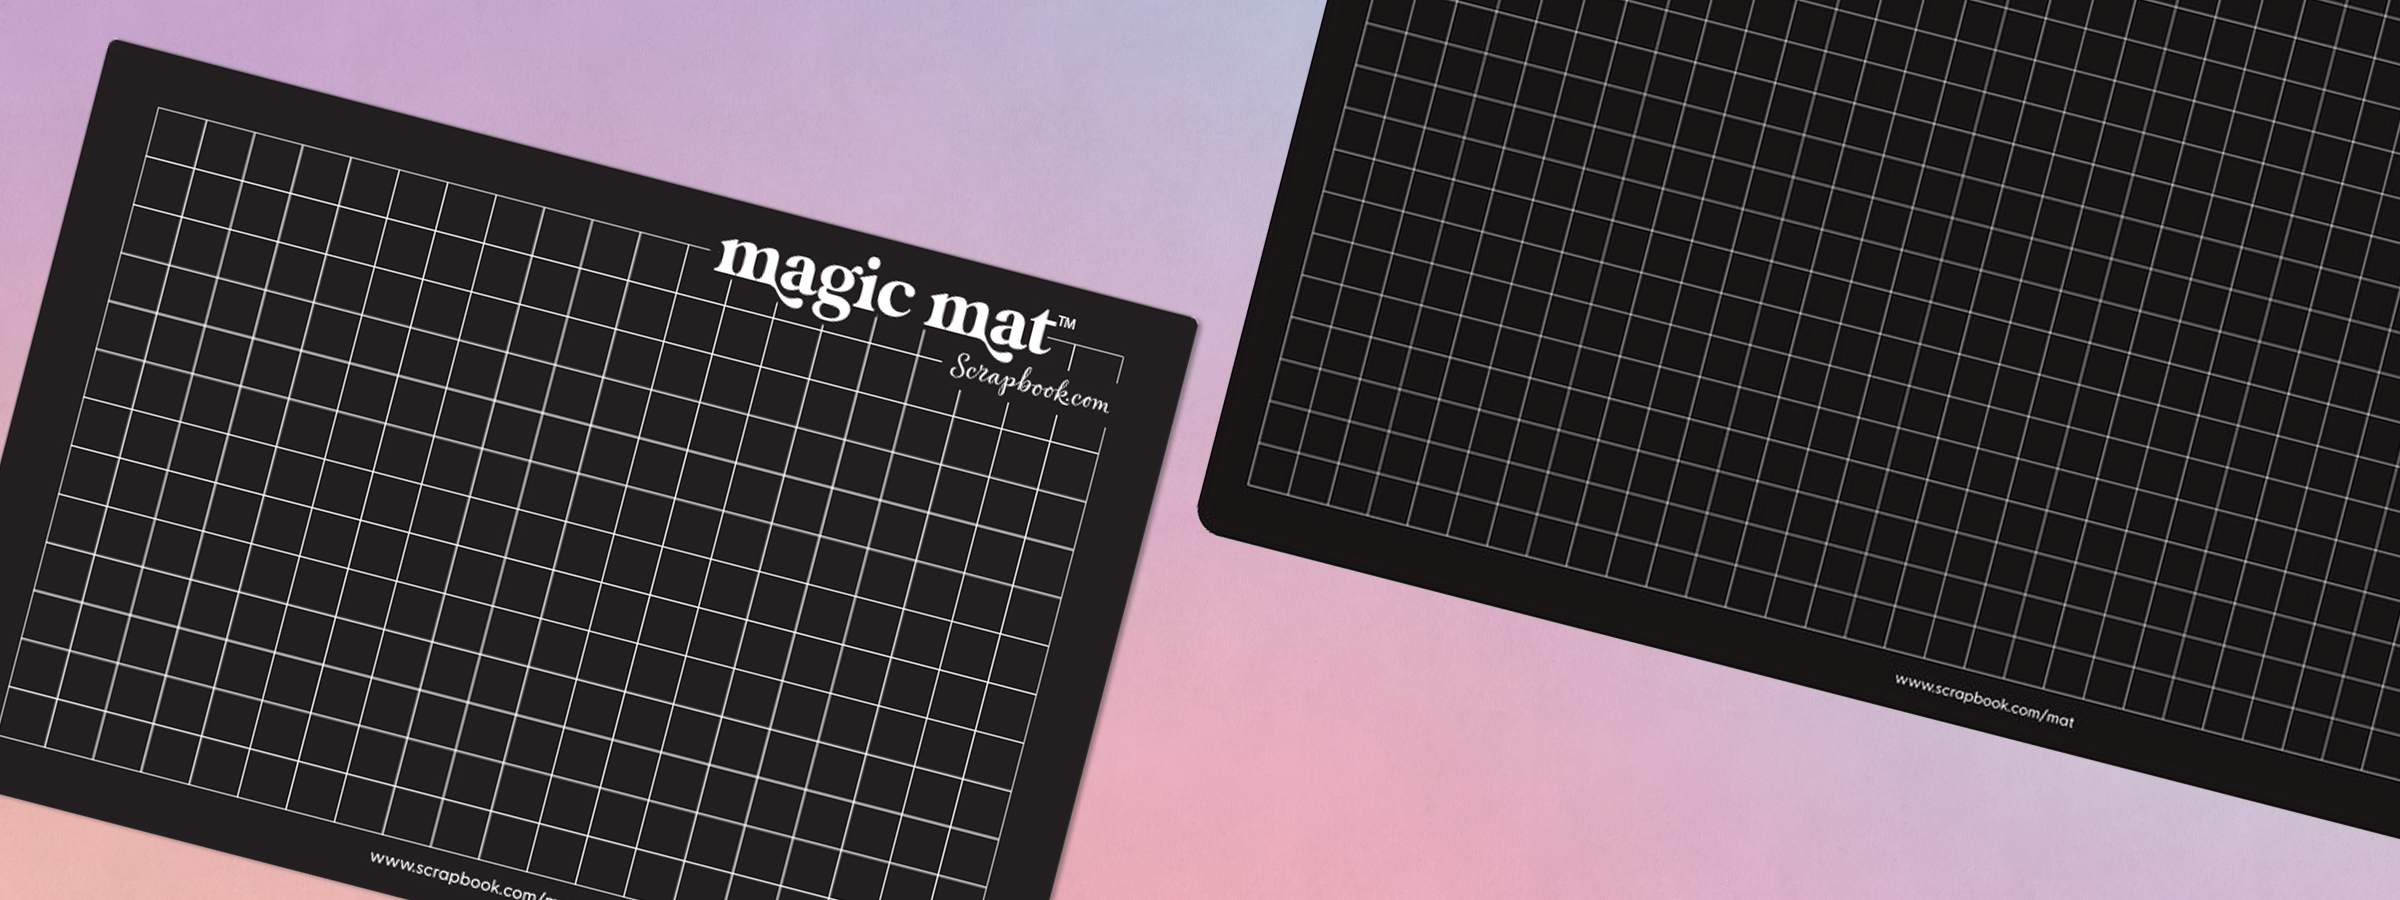 What Is The Magic Mat? 